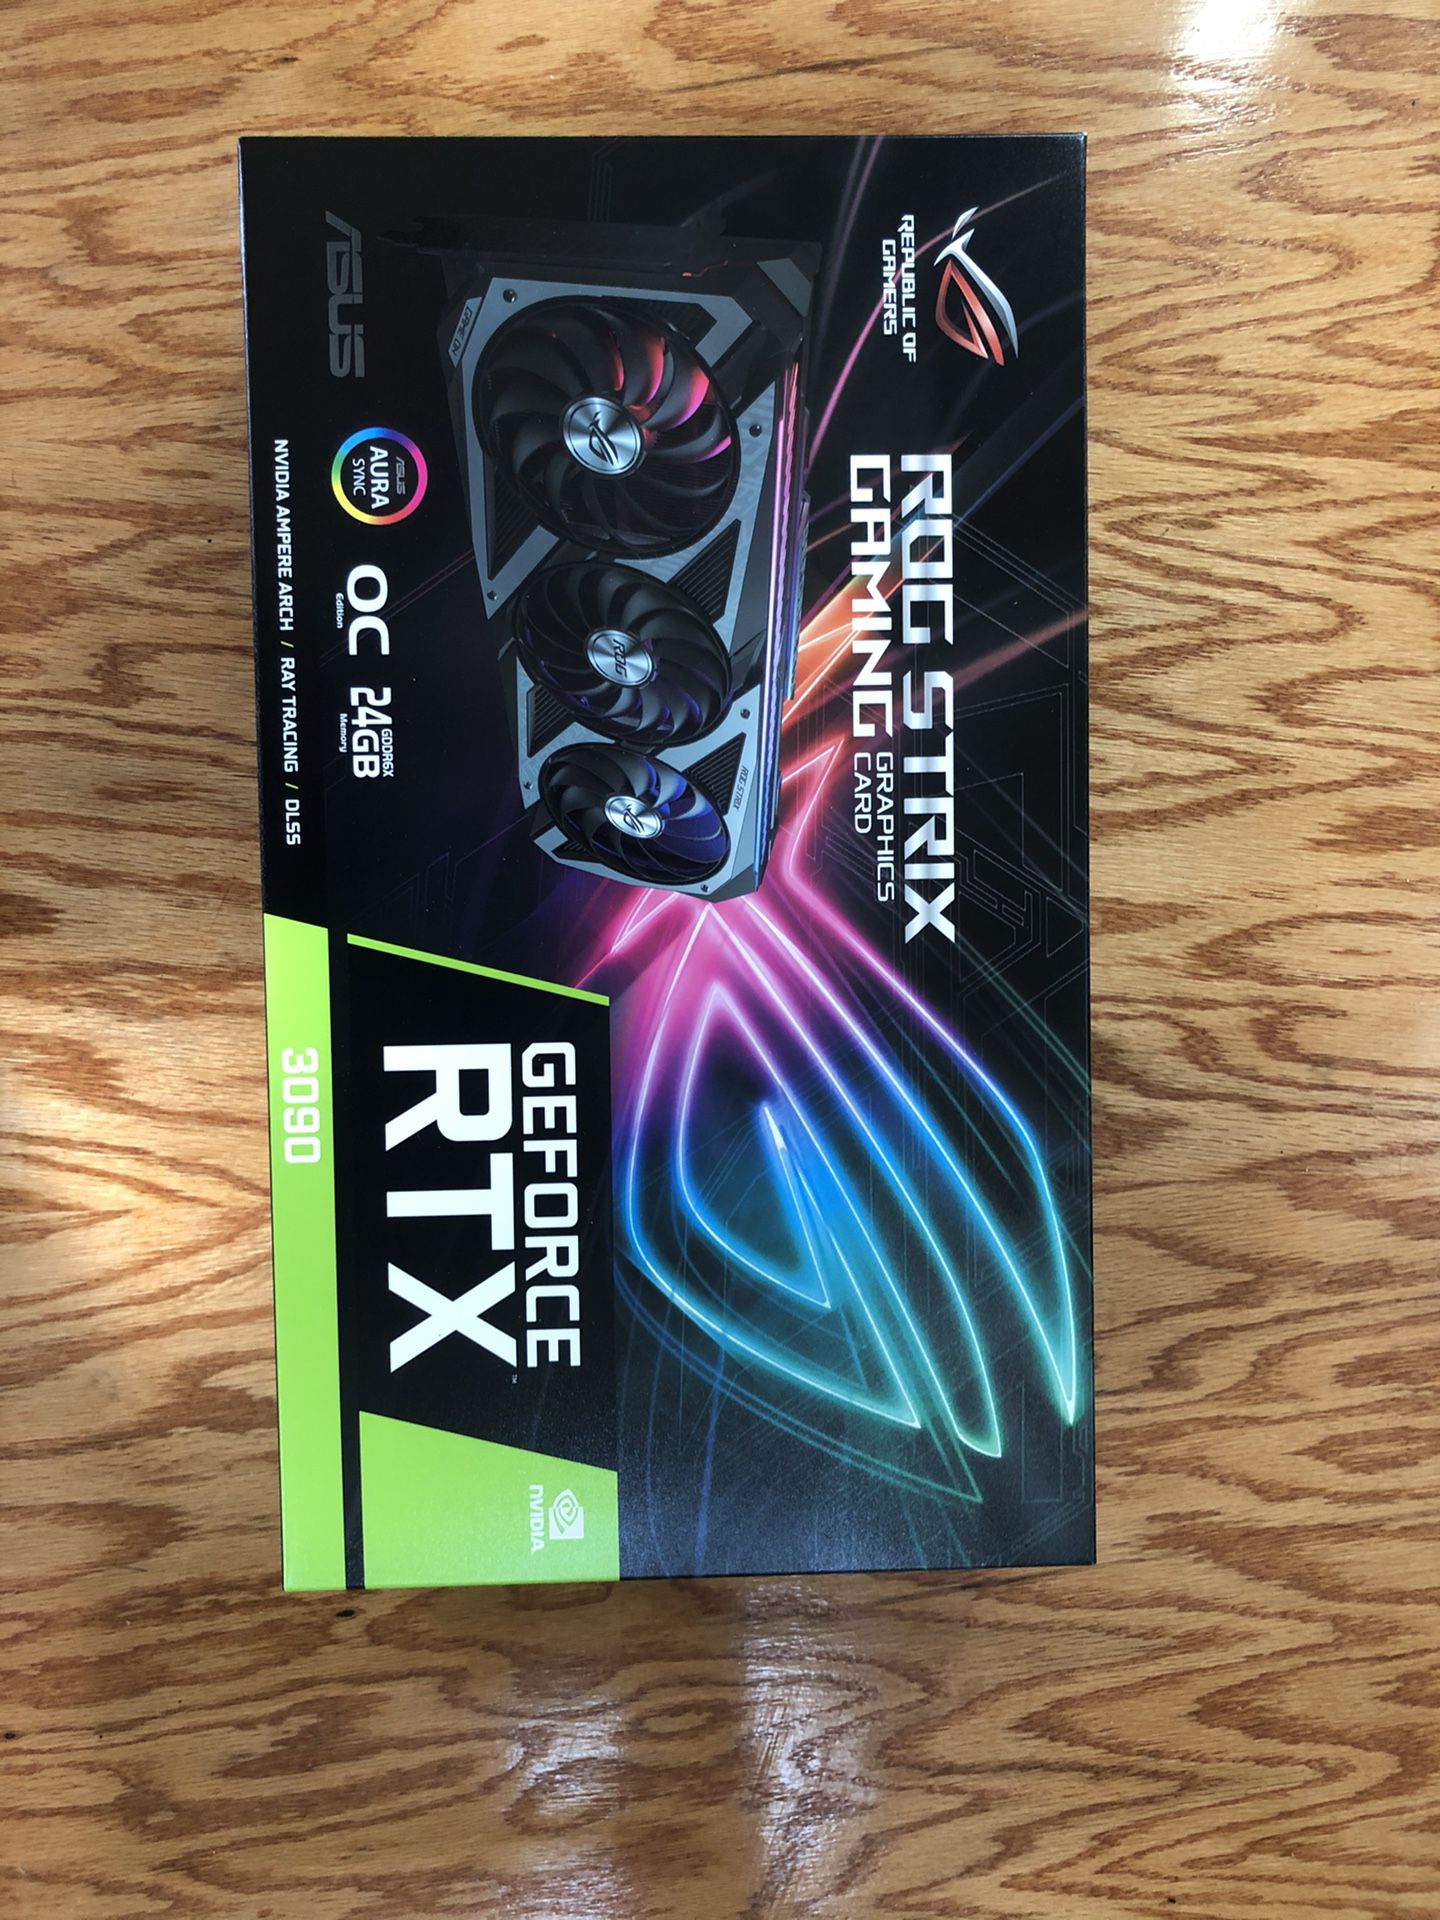 ASUS Rtx 3090 Strix Oc Gaming *In Hand*